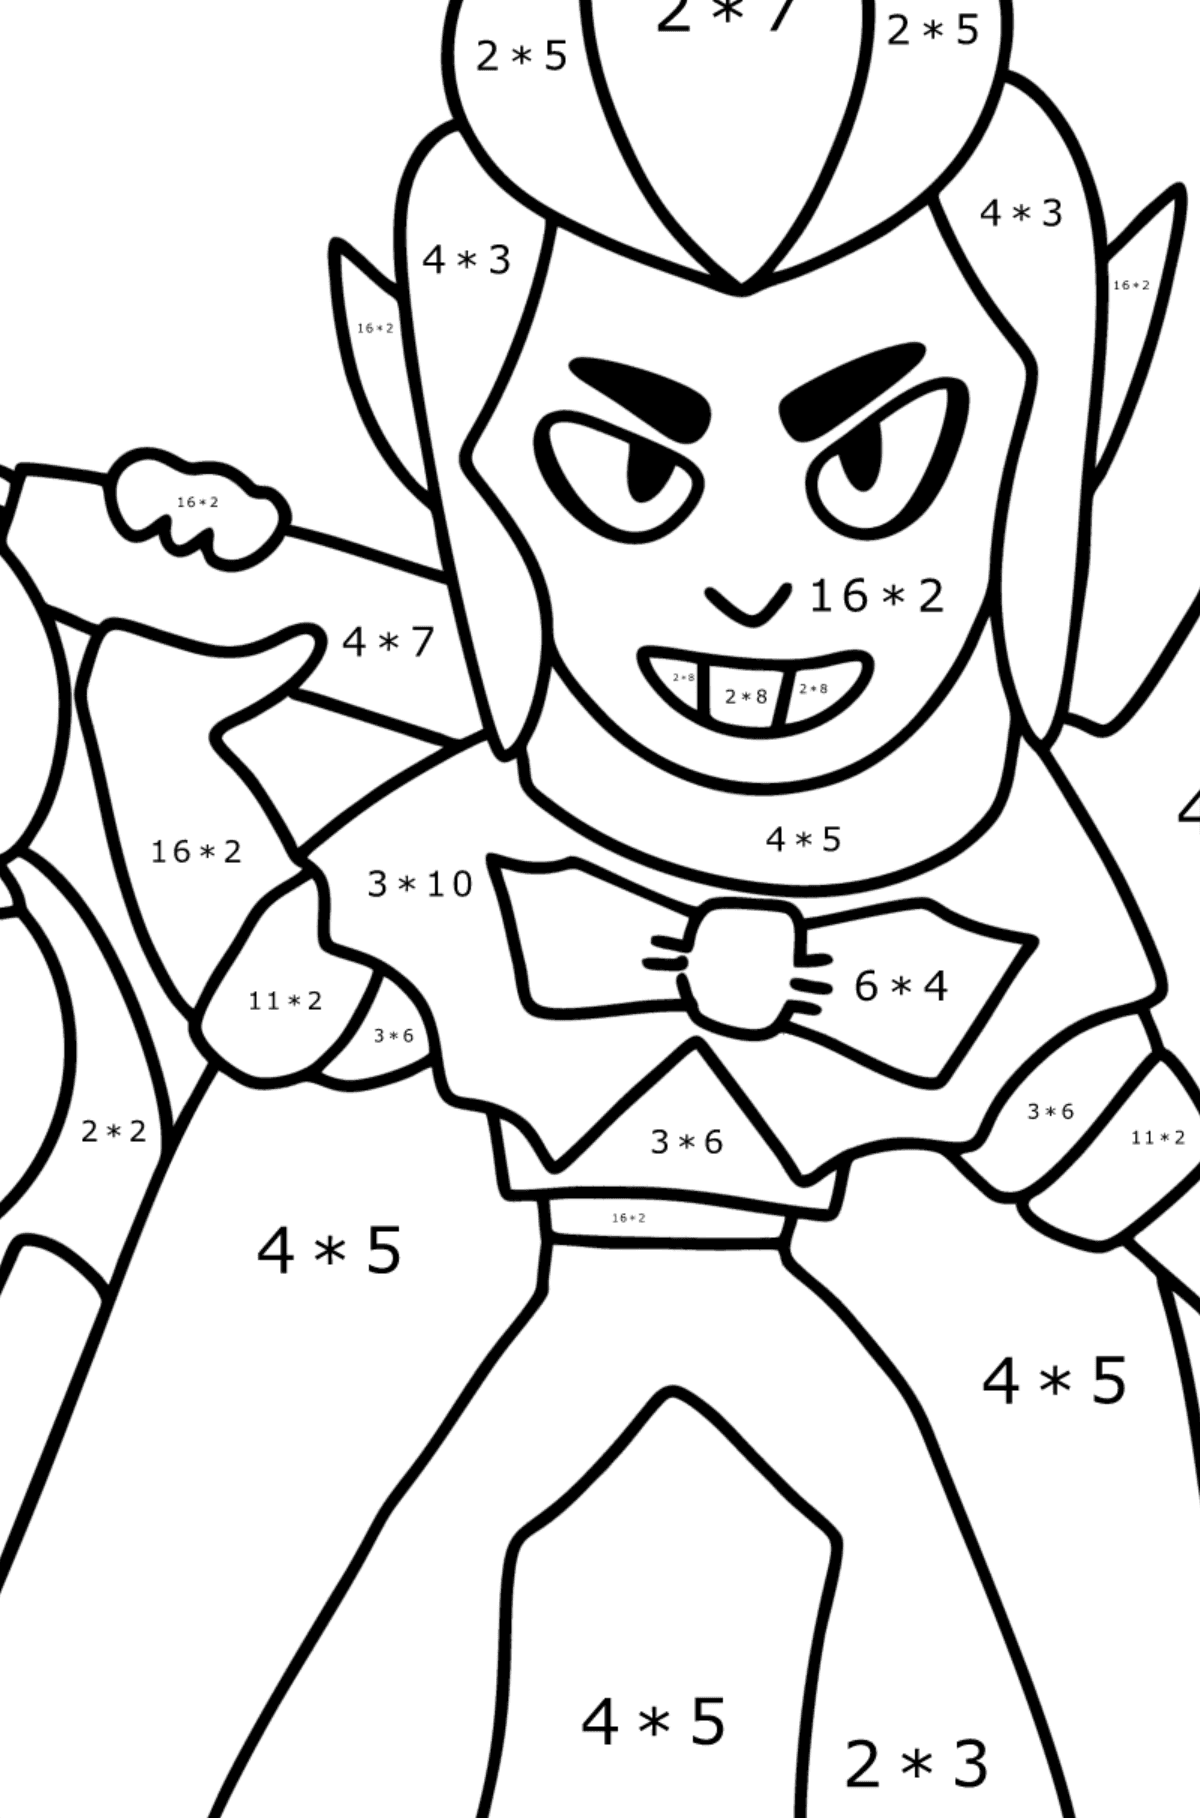 Brawl Stars Mortis coloring page - Math Coloring - Multiplication for Kids